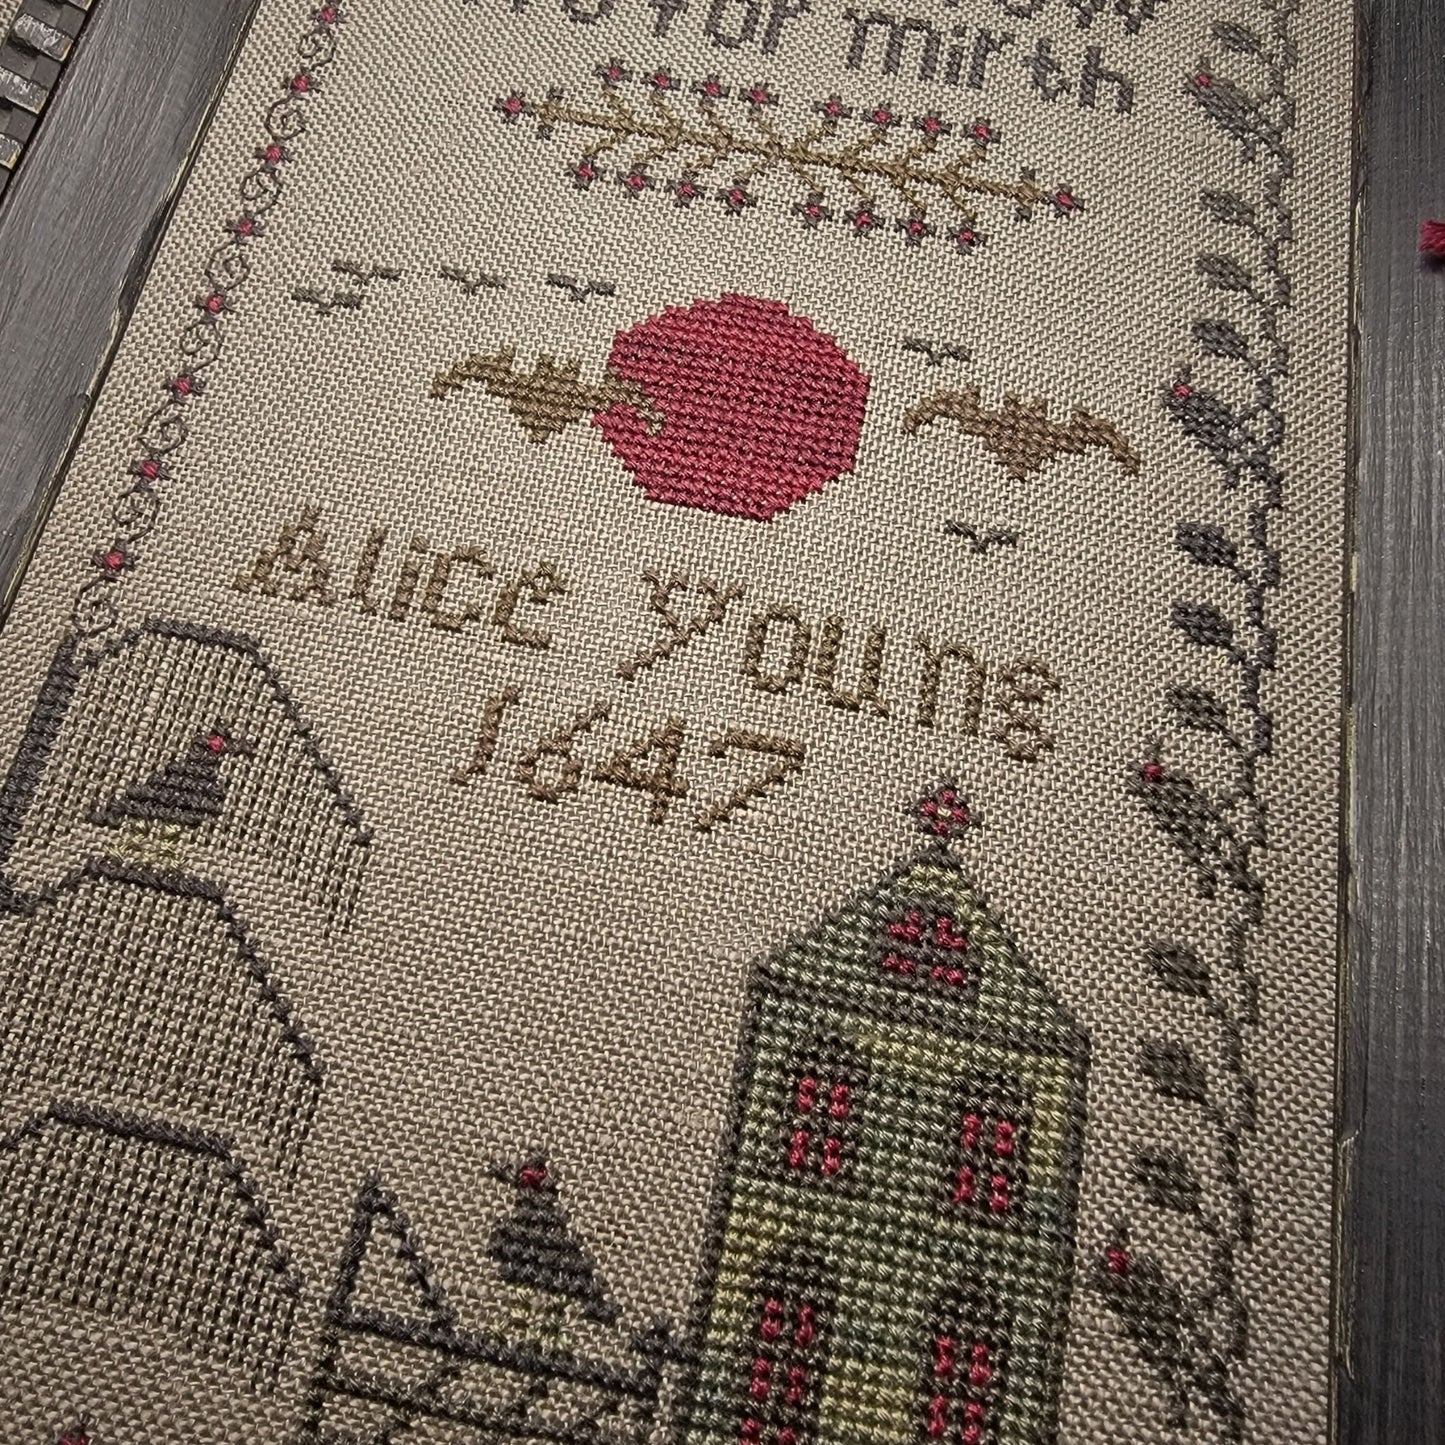 Alice Young 1647 Sampler Paper Chart